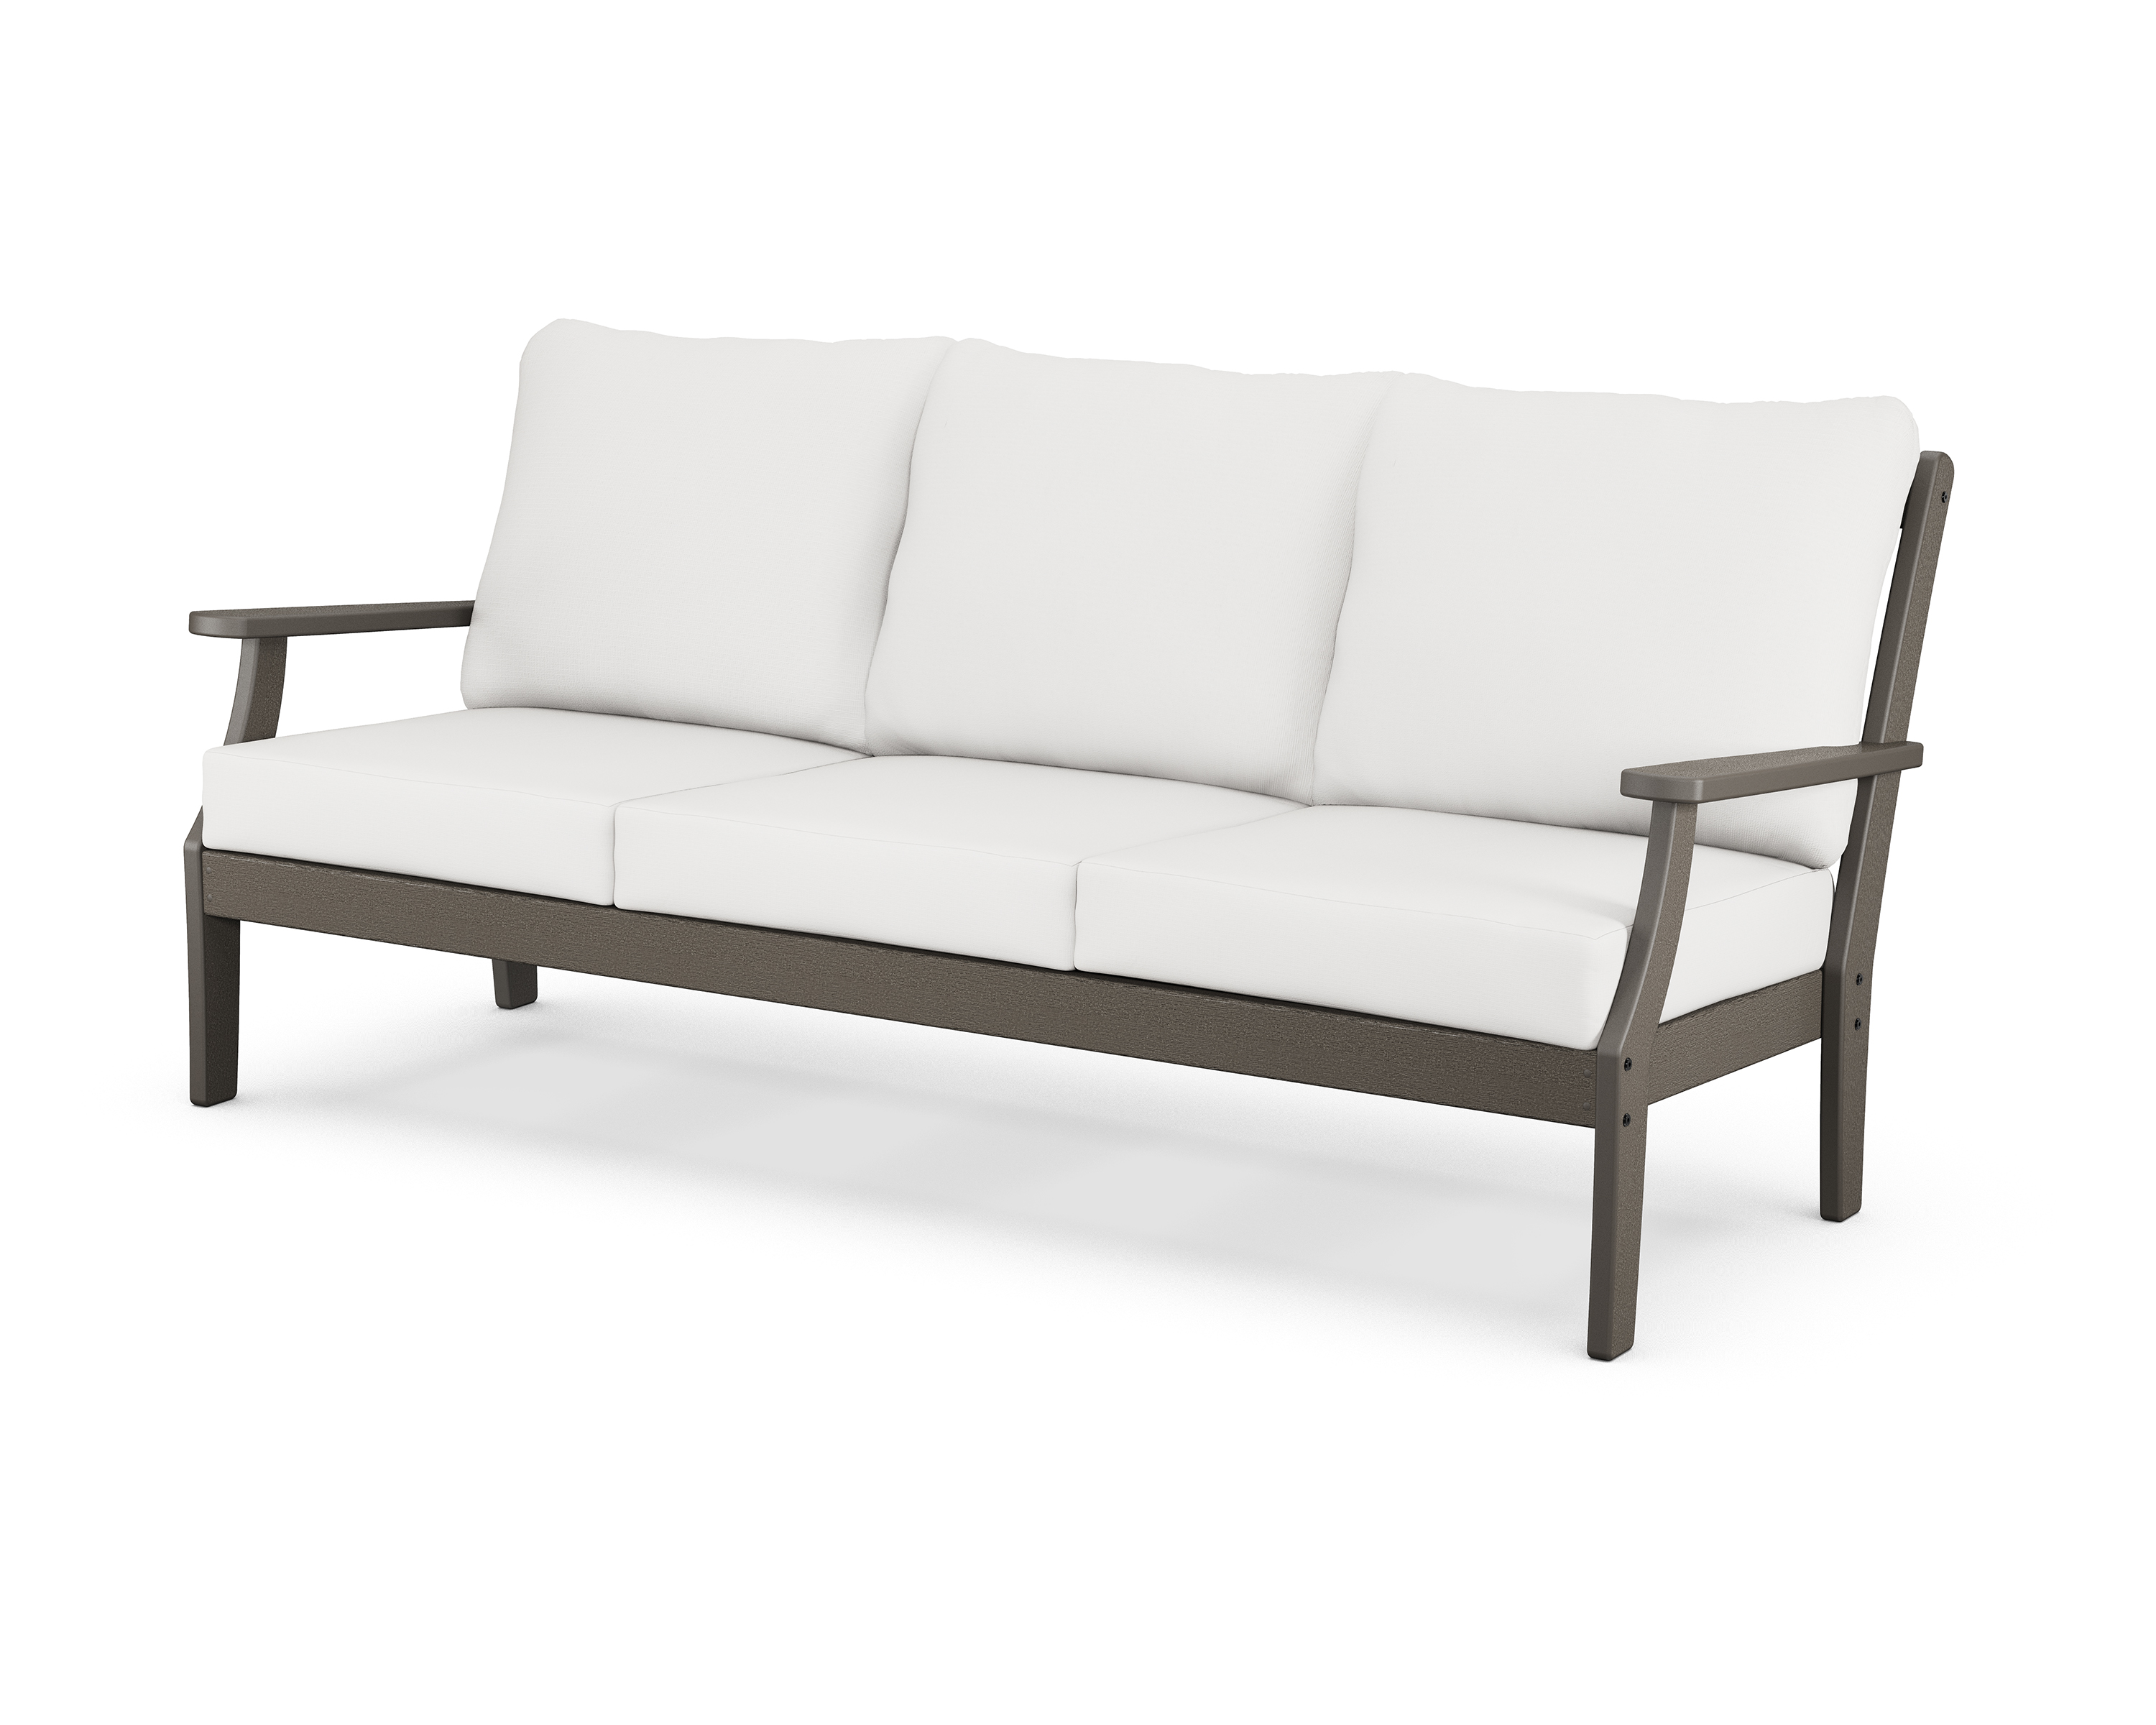 braxton deep seating sofa in vintage coffee / textured linen product image